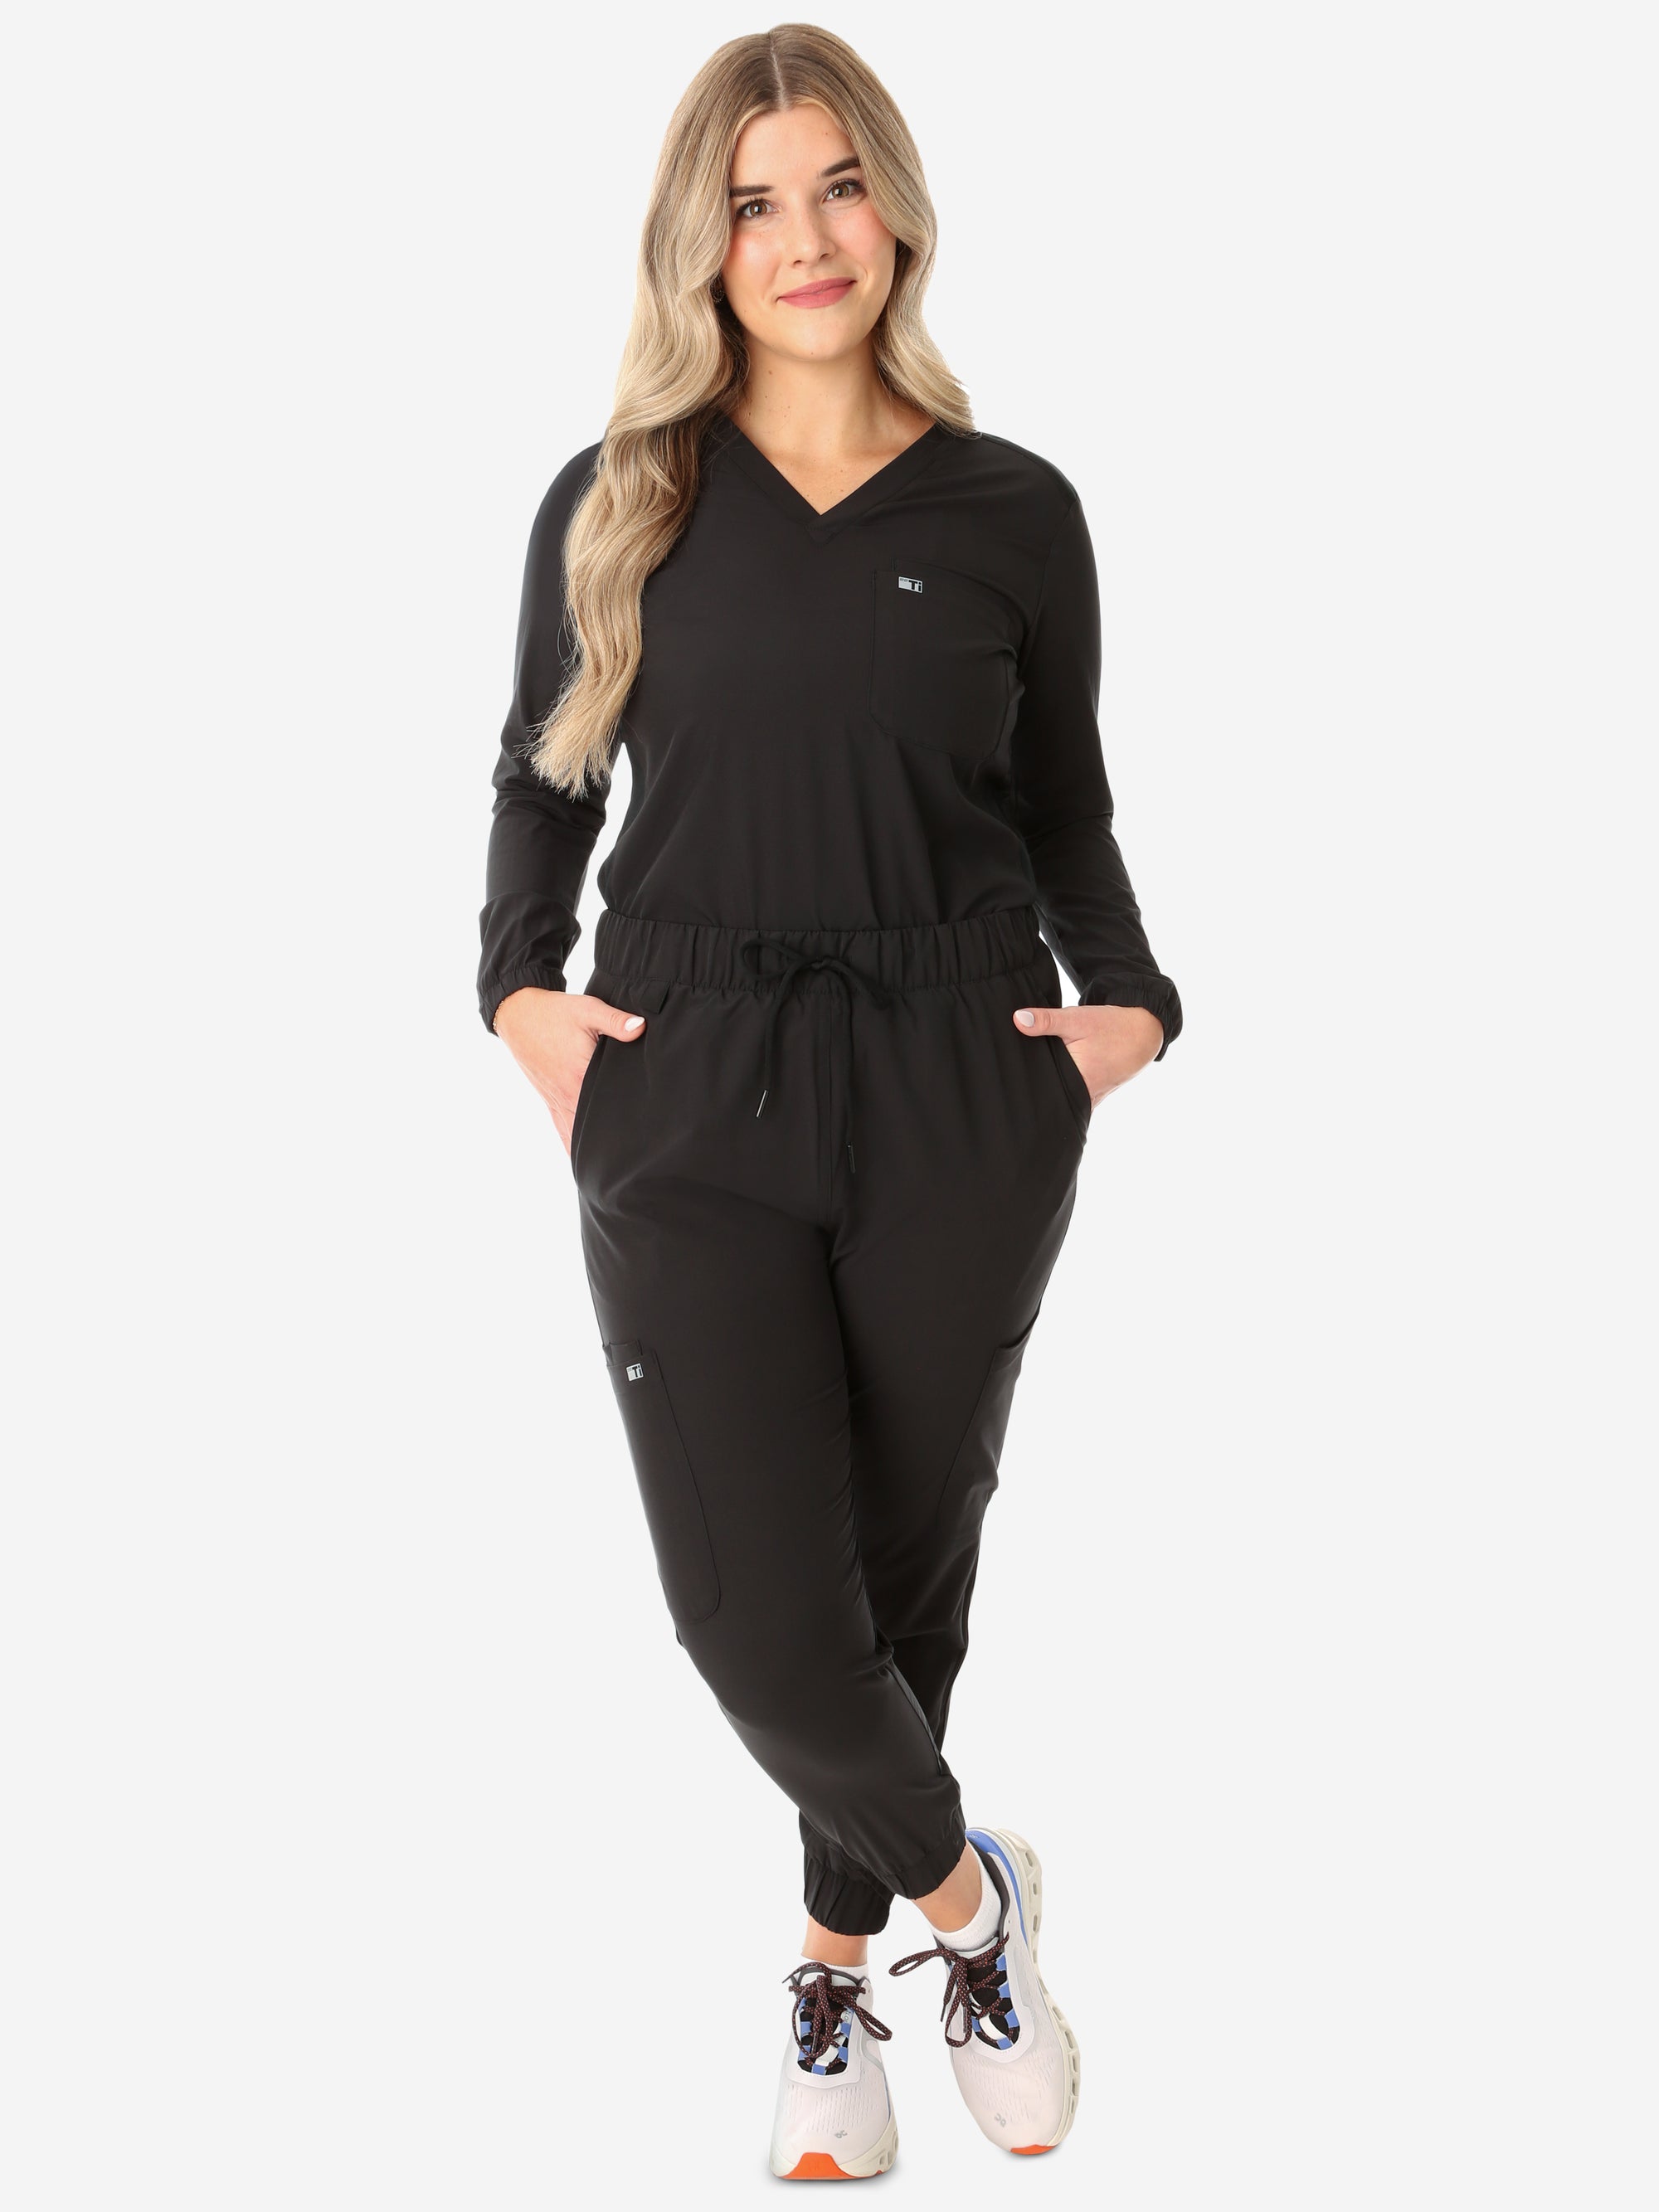 Women&#39;s Real Black Long-Sleeve Scrub Top Tucked with Perfect JoggersFront View Full Body